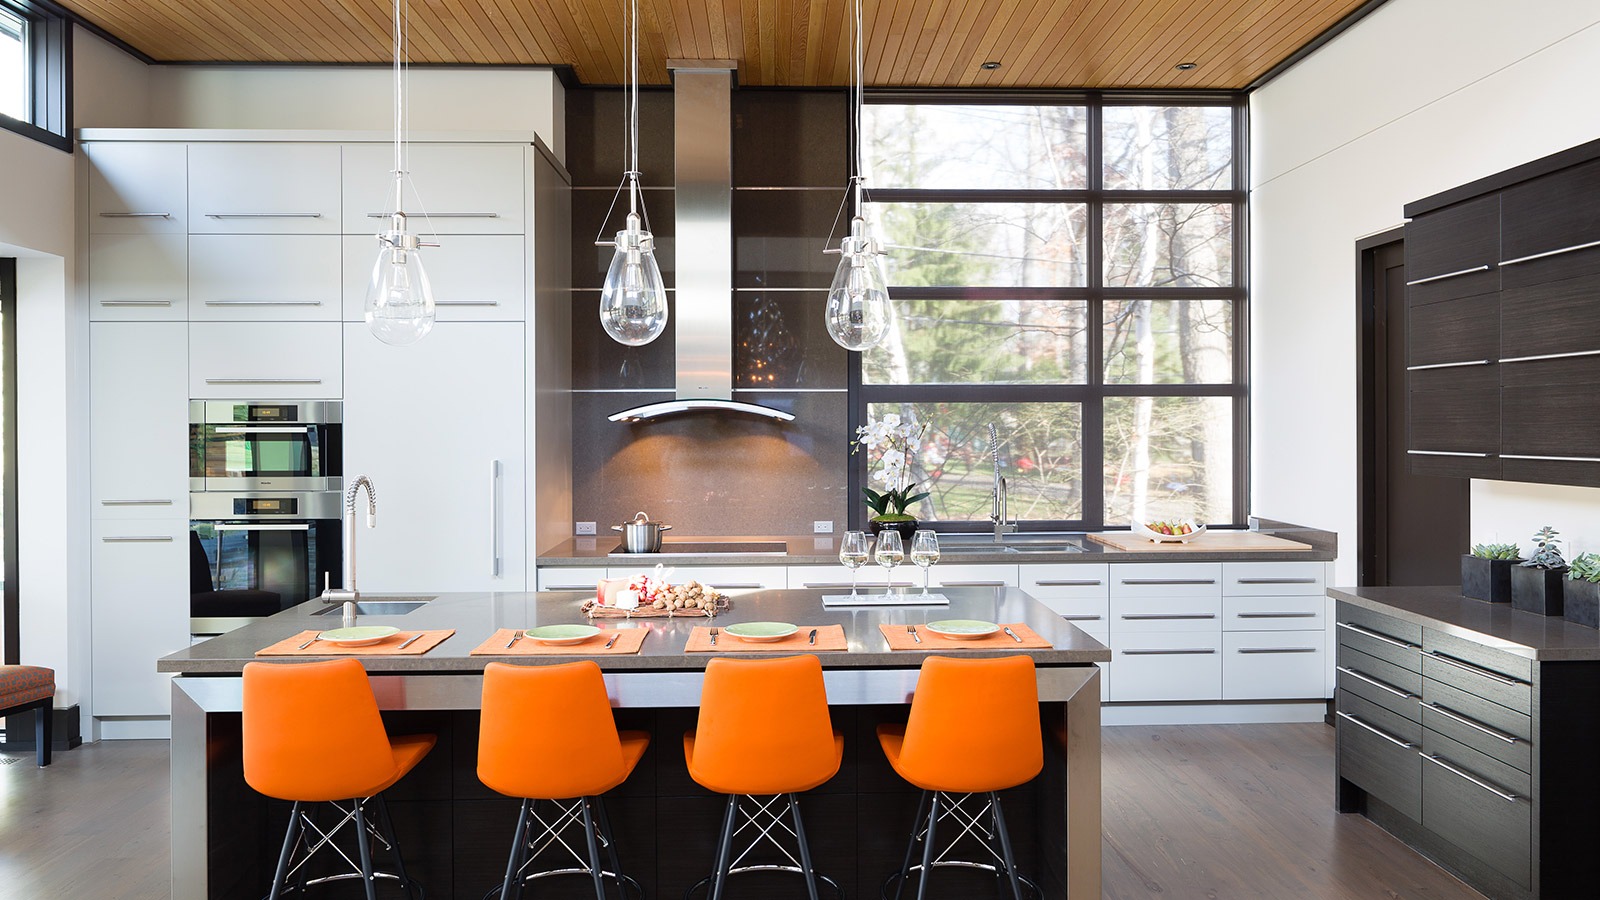 Contemporary kitchen with dark cabinetry, black frame windows and breakfast bar.